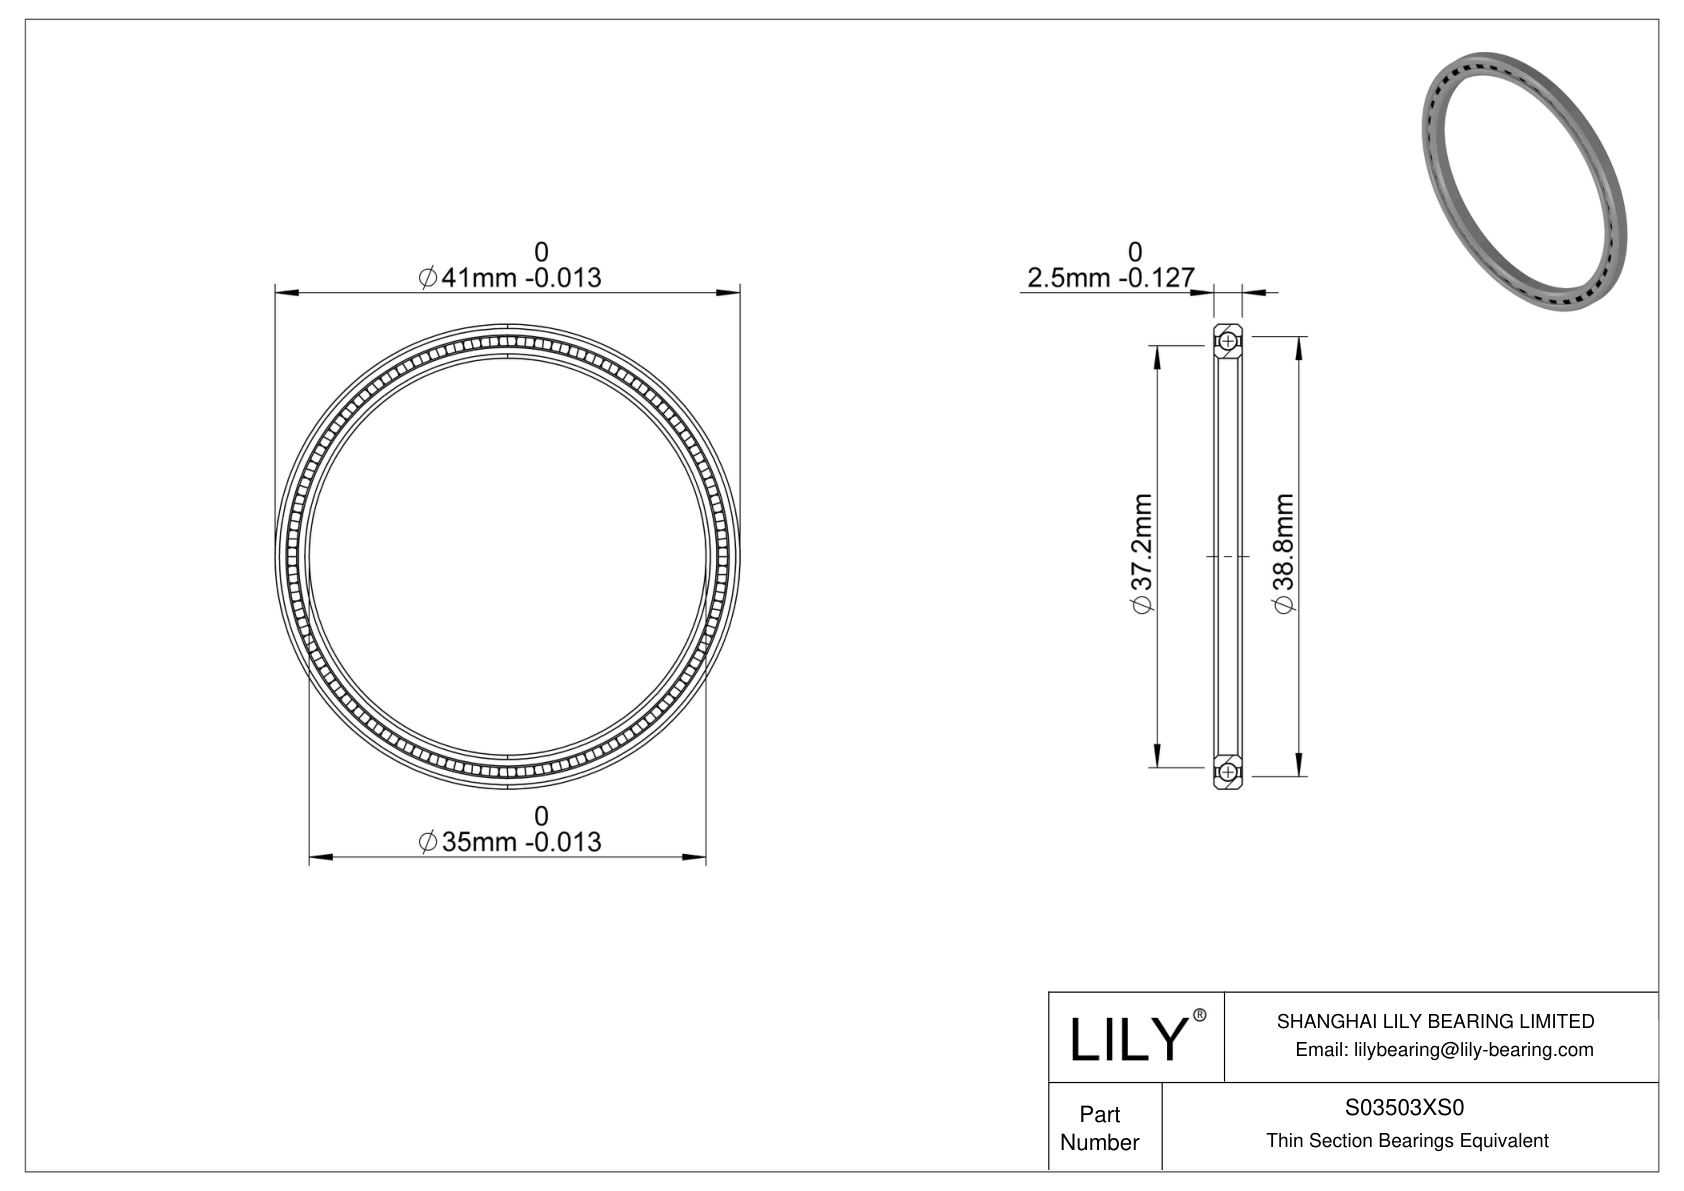 S03503XS0 Constant Section (CS) Bearings cad drawing